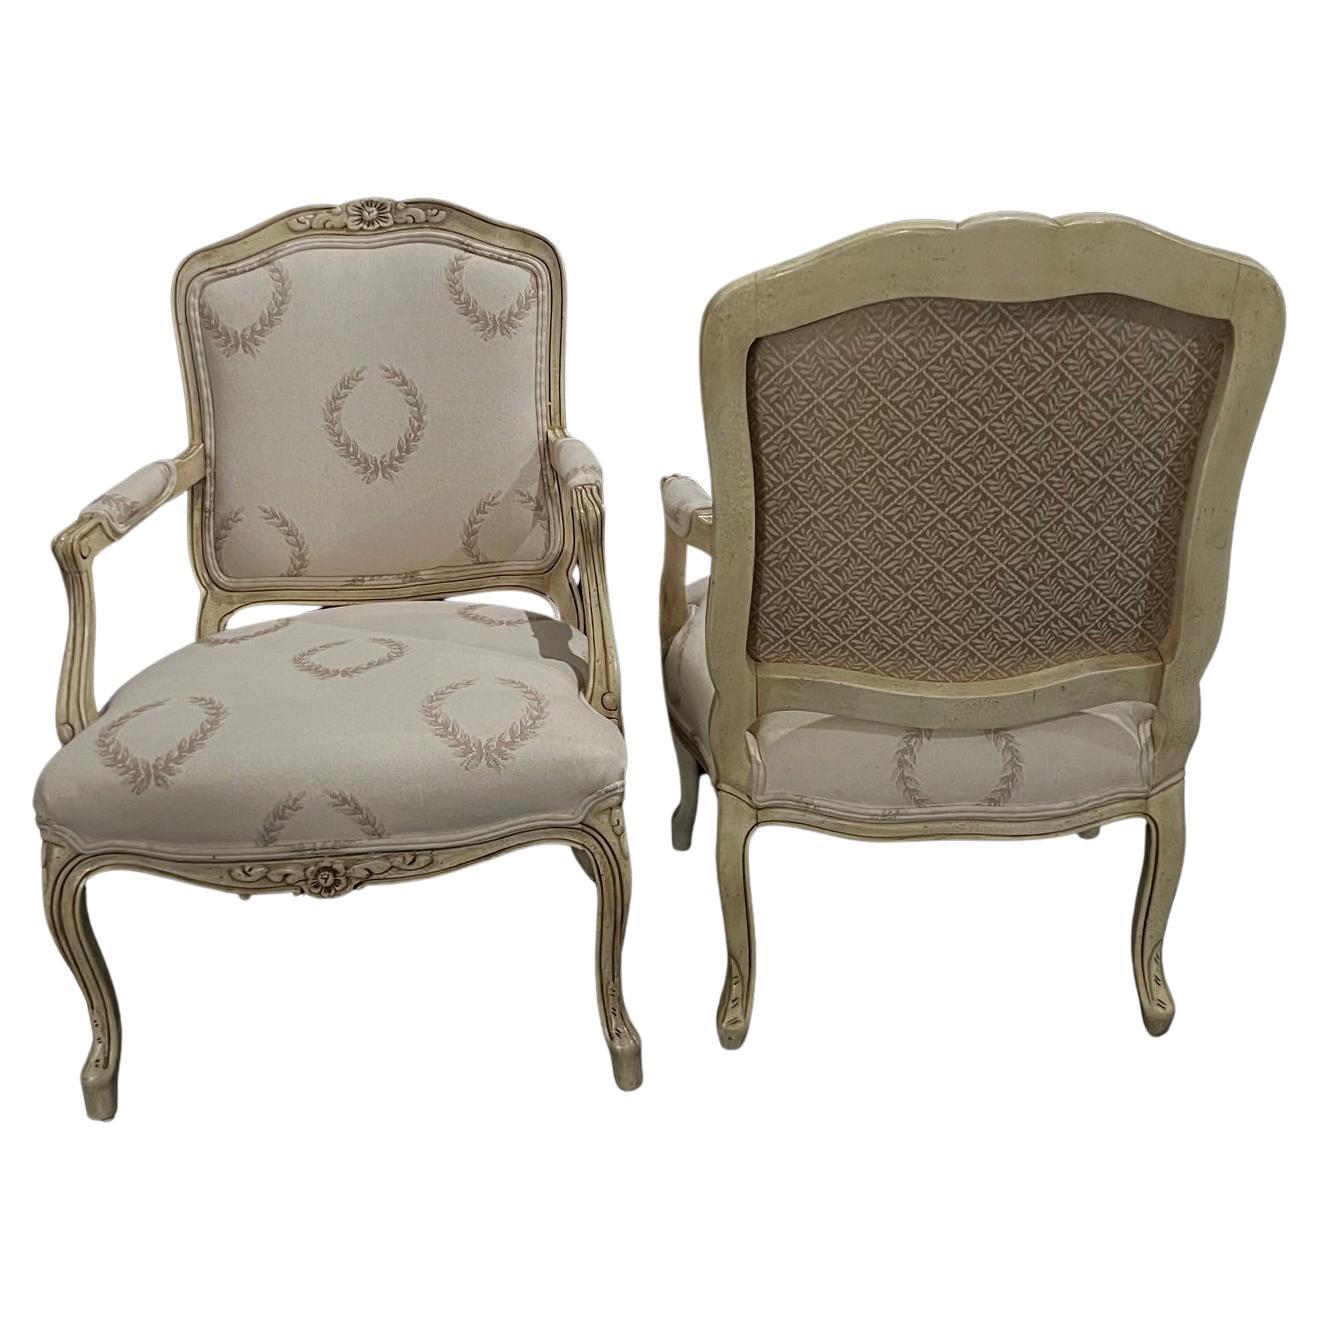 Classic Pair of French Louis XV Style Painted UpholsteredArmchairs or Fauteuils 